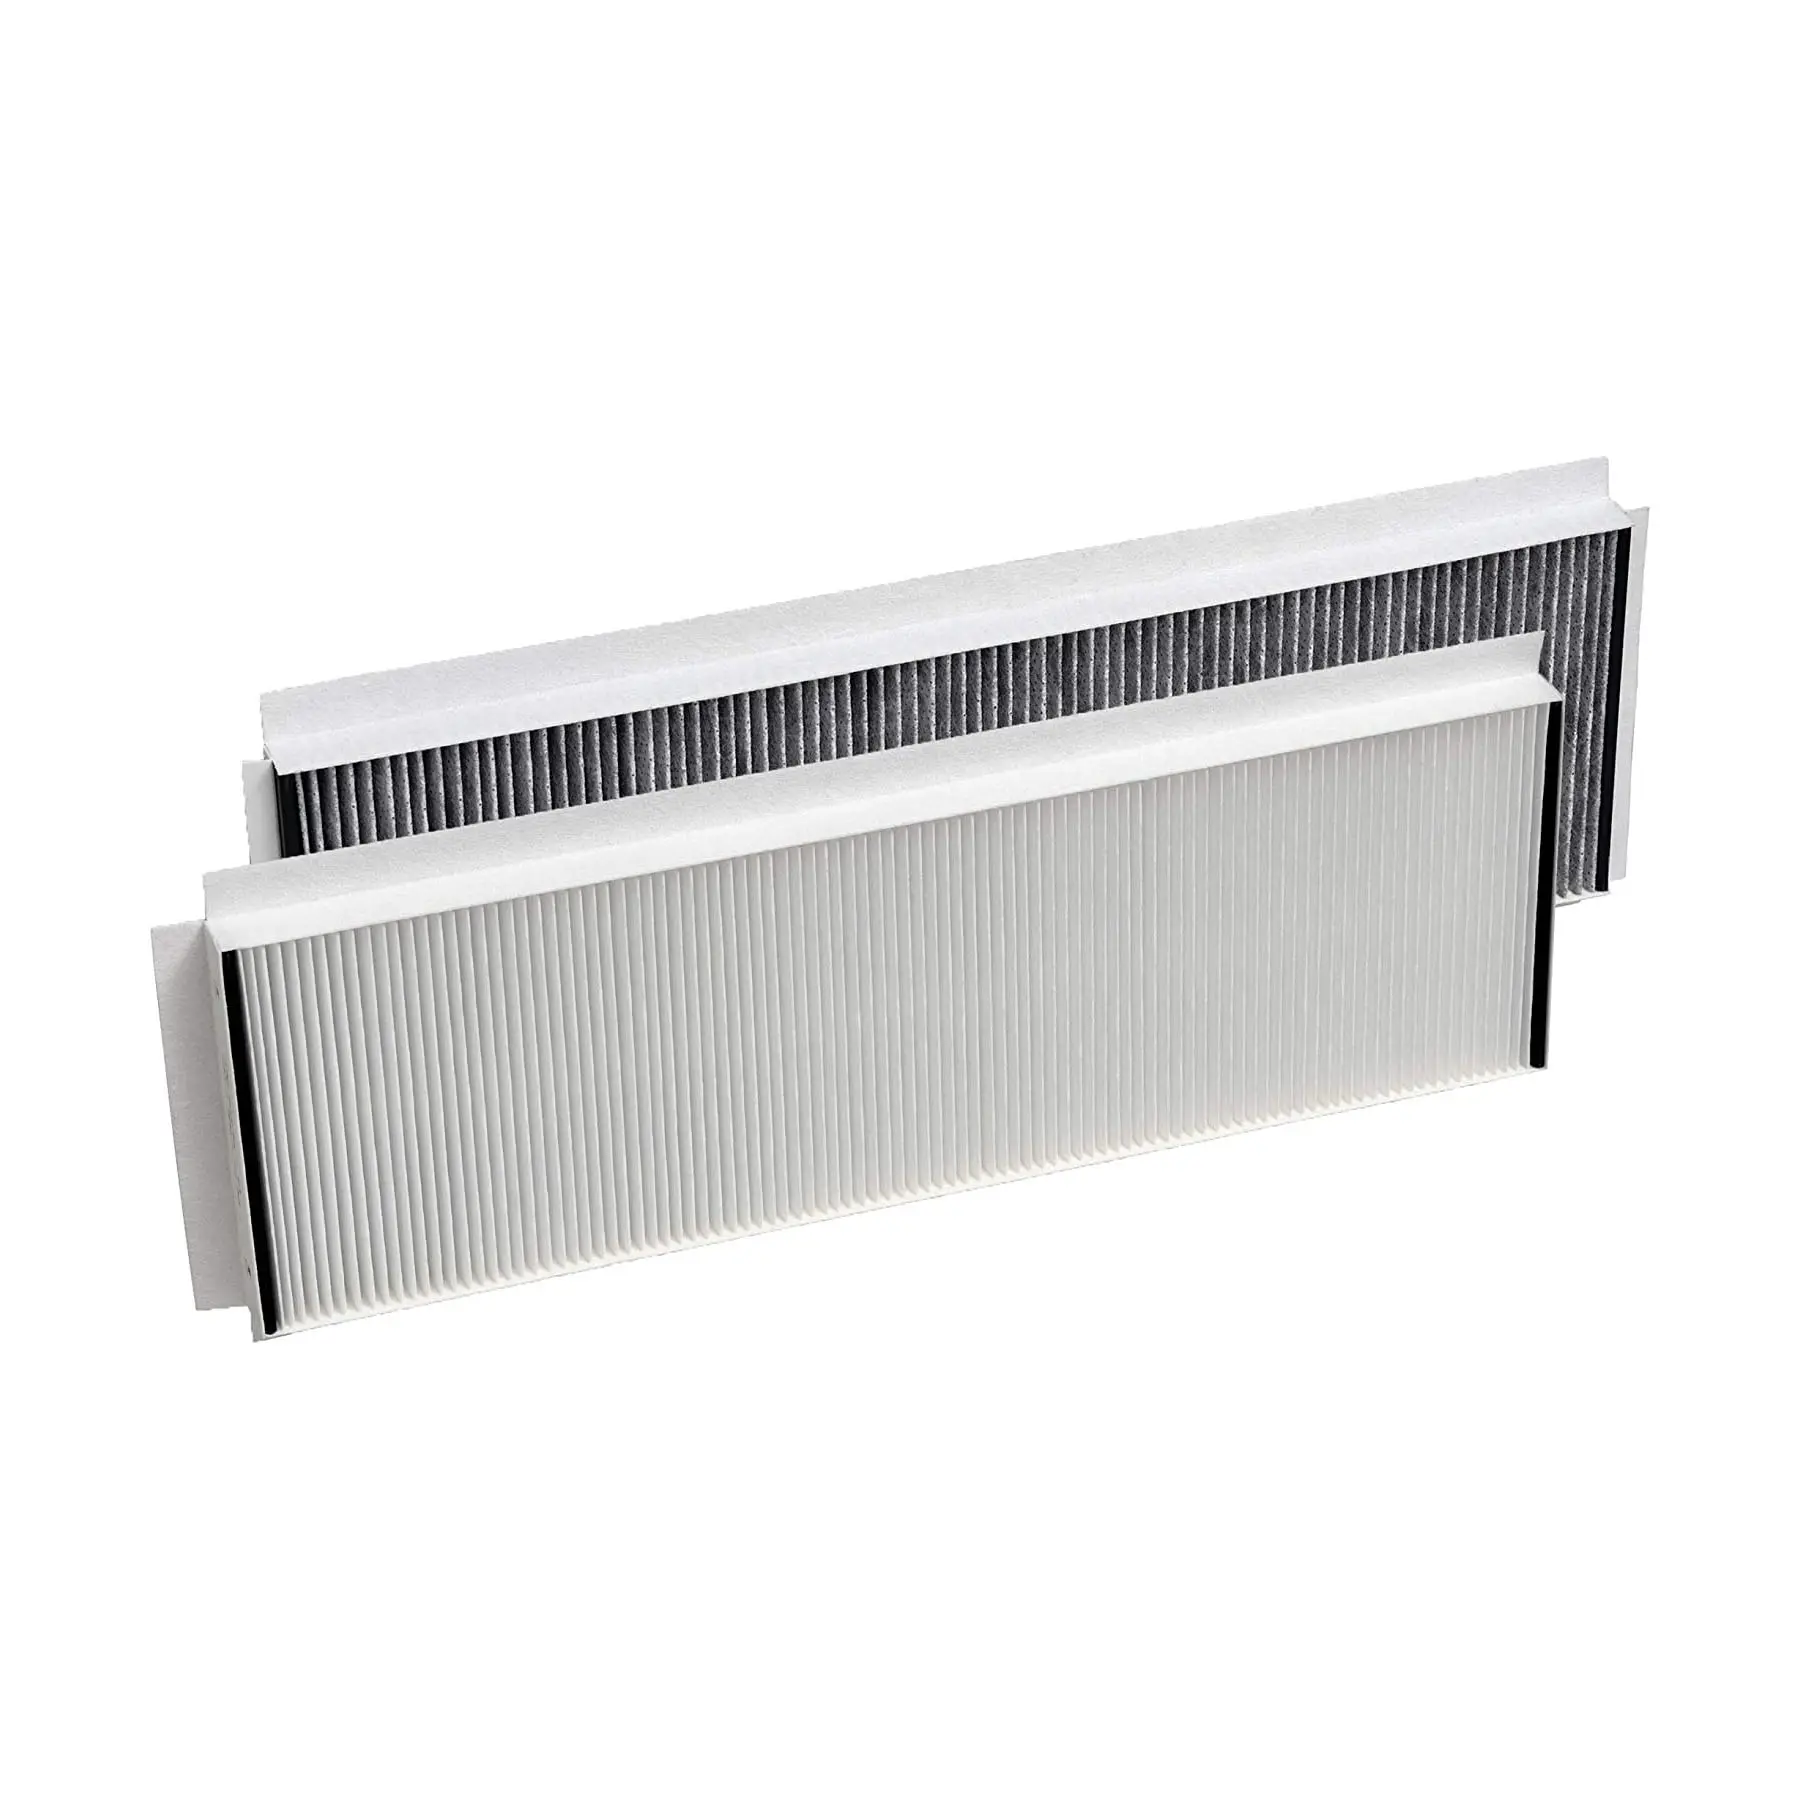 New Type Laminated G4 F7 clip Activated Carbon Fiber Cloth Air Filter for Zehnder ComfoAir Q 350/450/600 ventilation system